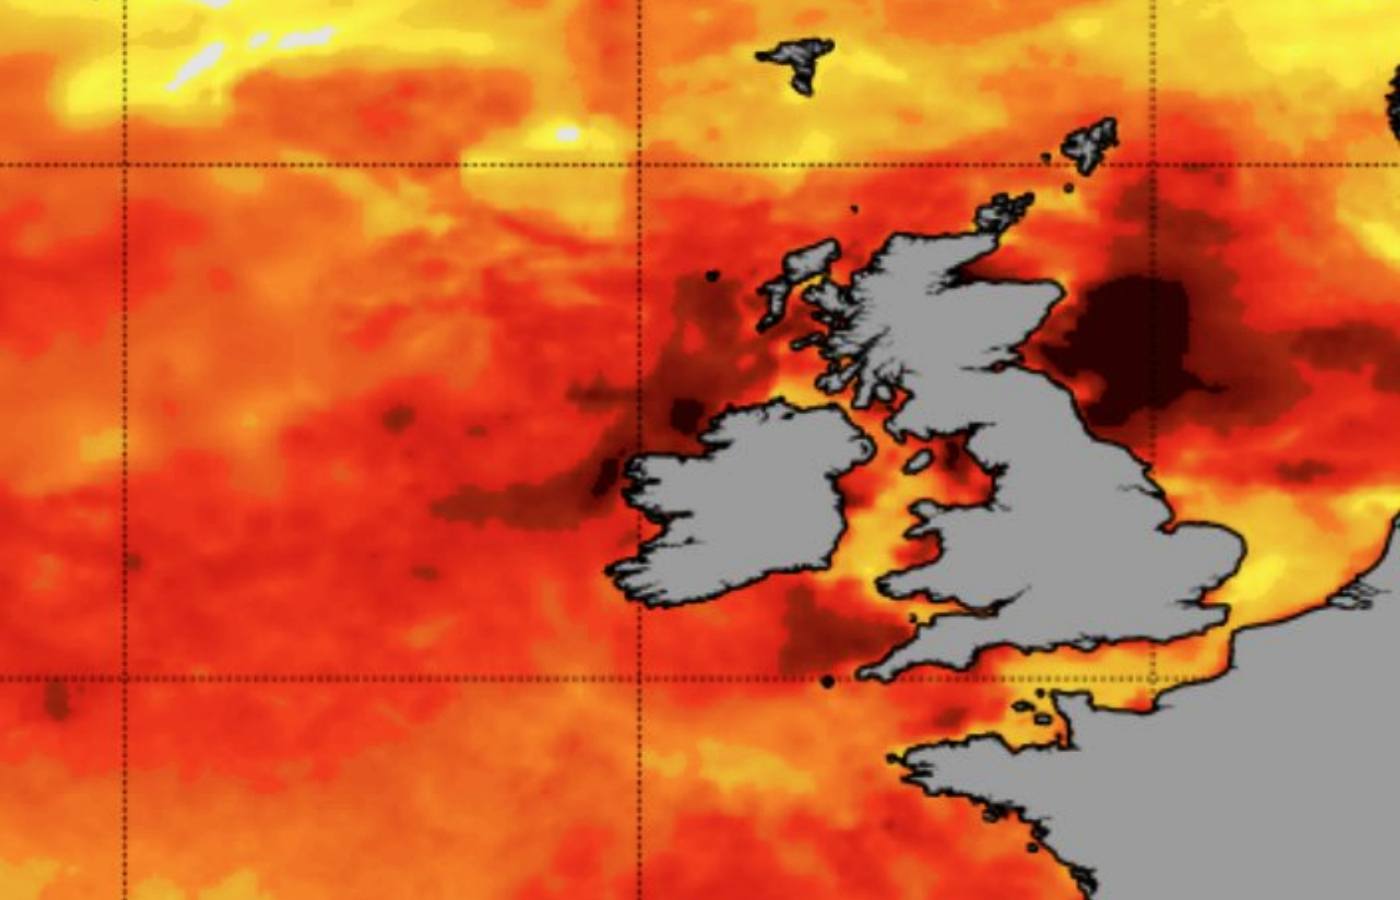 Water temperatures off Scotland are as much as 4C above normal - shown in black.